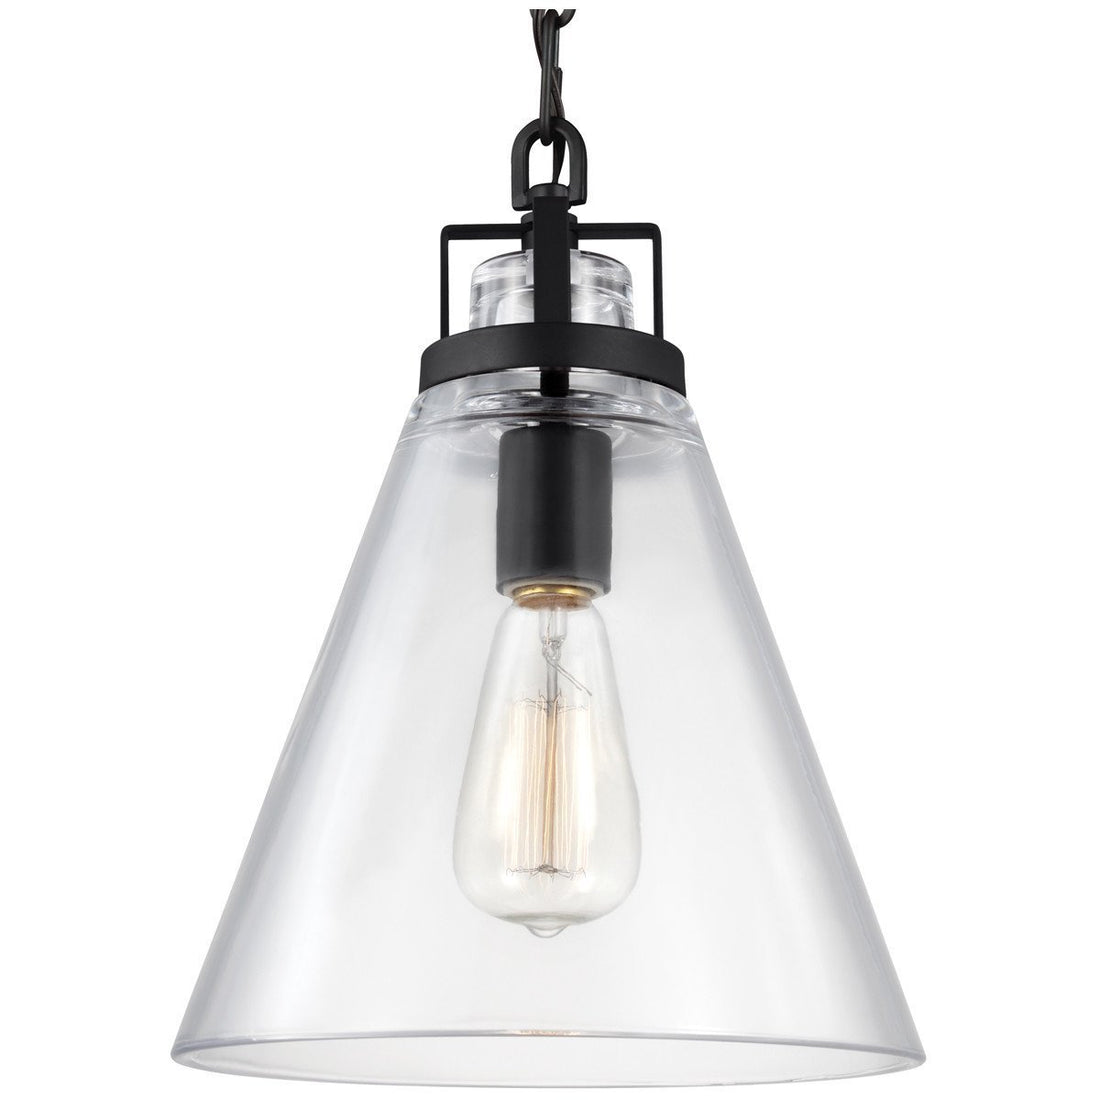 Feiss Frontage 1 Light Clear Glass Pendant